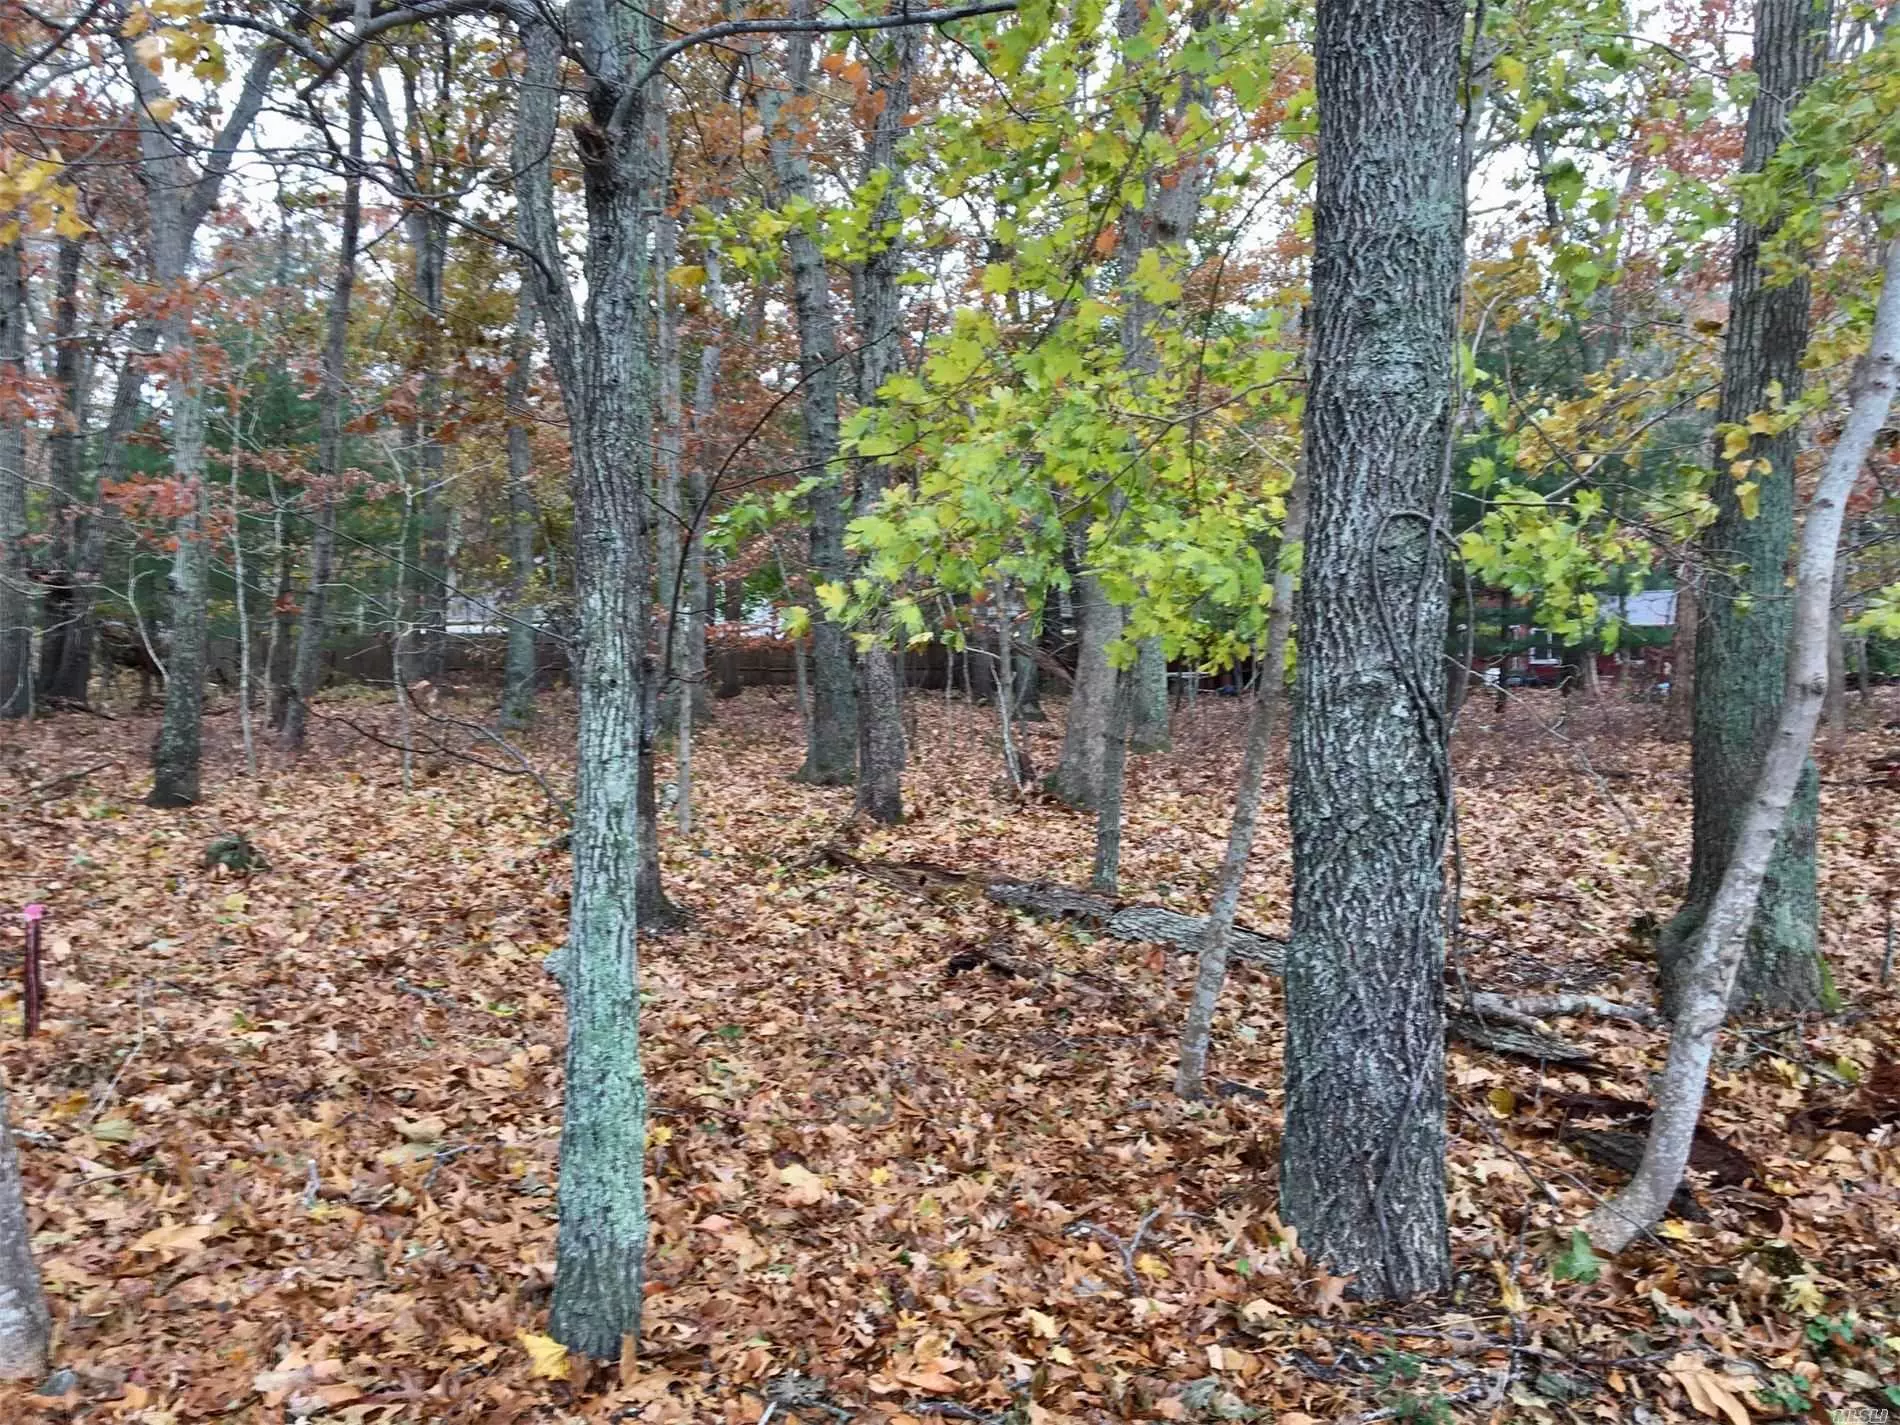 Level Wooded Lot Next To South Harbor Park Community With It&rsquo;s Beautiful Sandy Bay Beach. Great Location On A Quiet Road. The Perfect Place To Build Your Vacation Or Year Round Home.